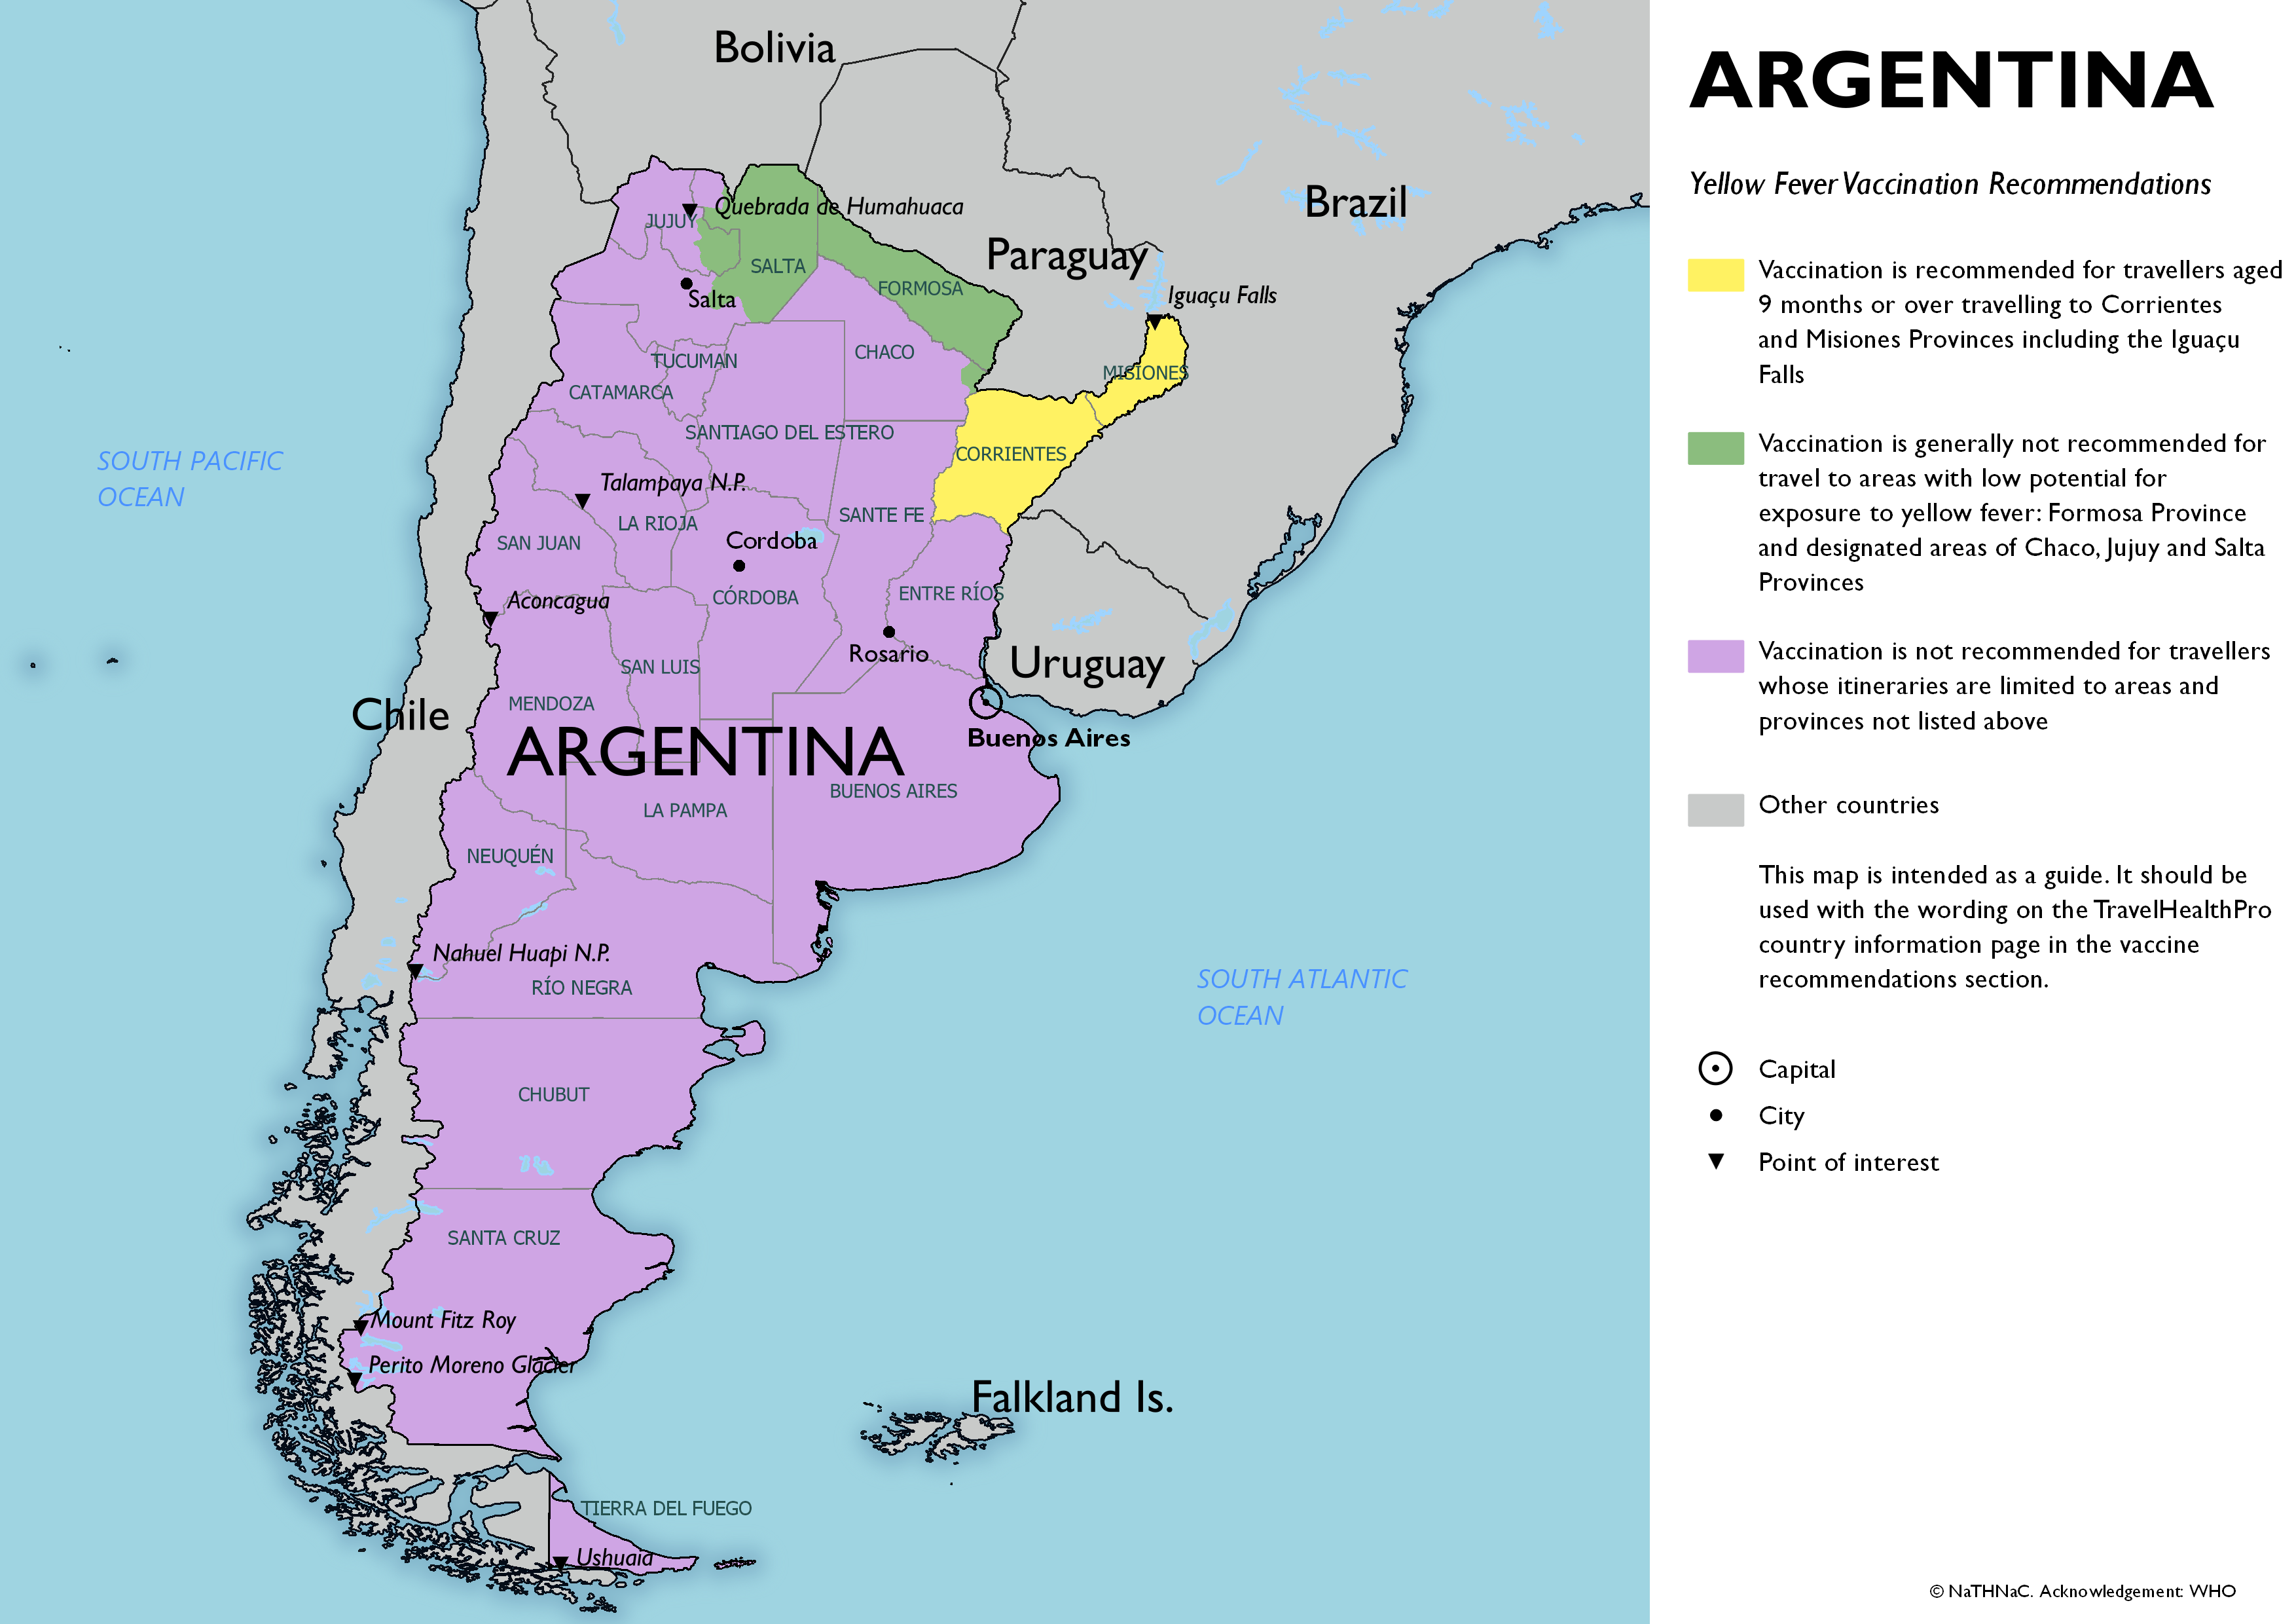 Yellow fever vaccine recommendation map for Argentina